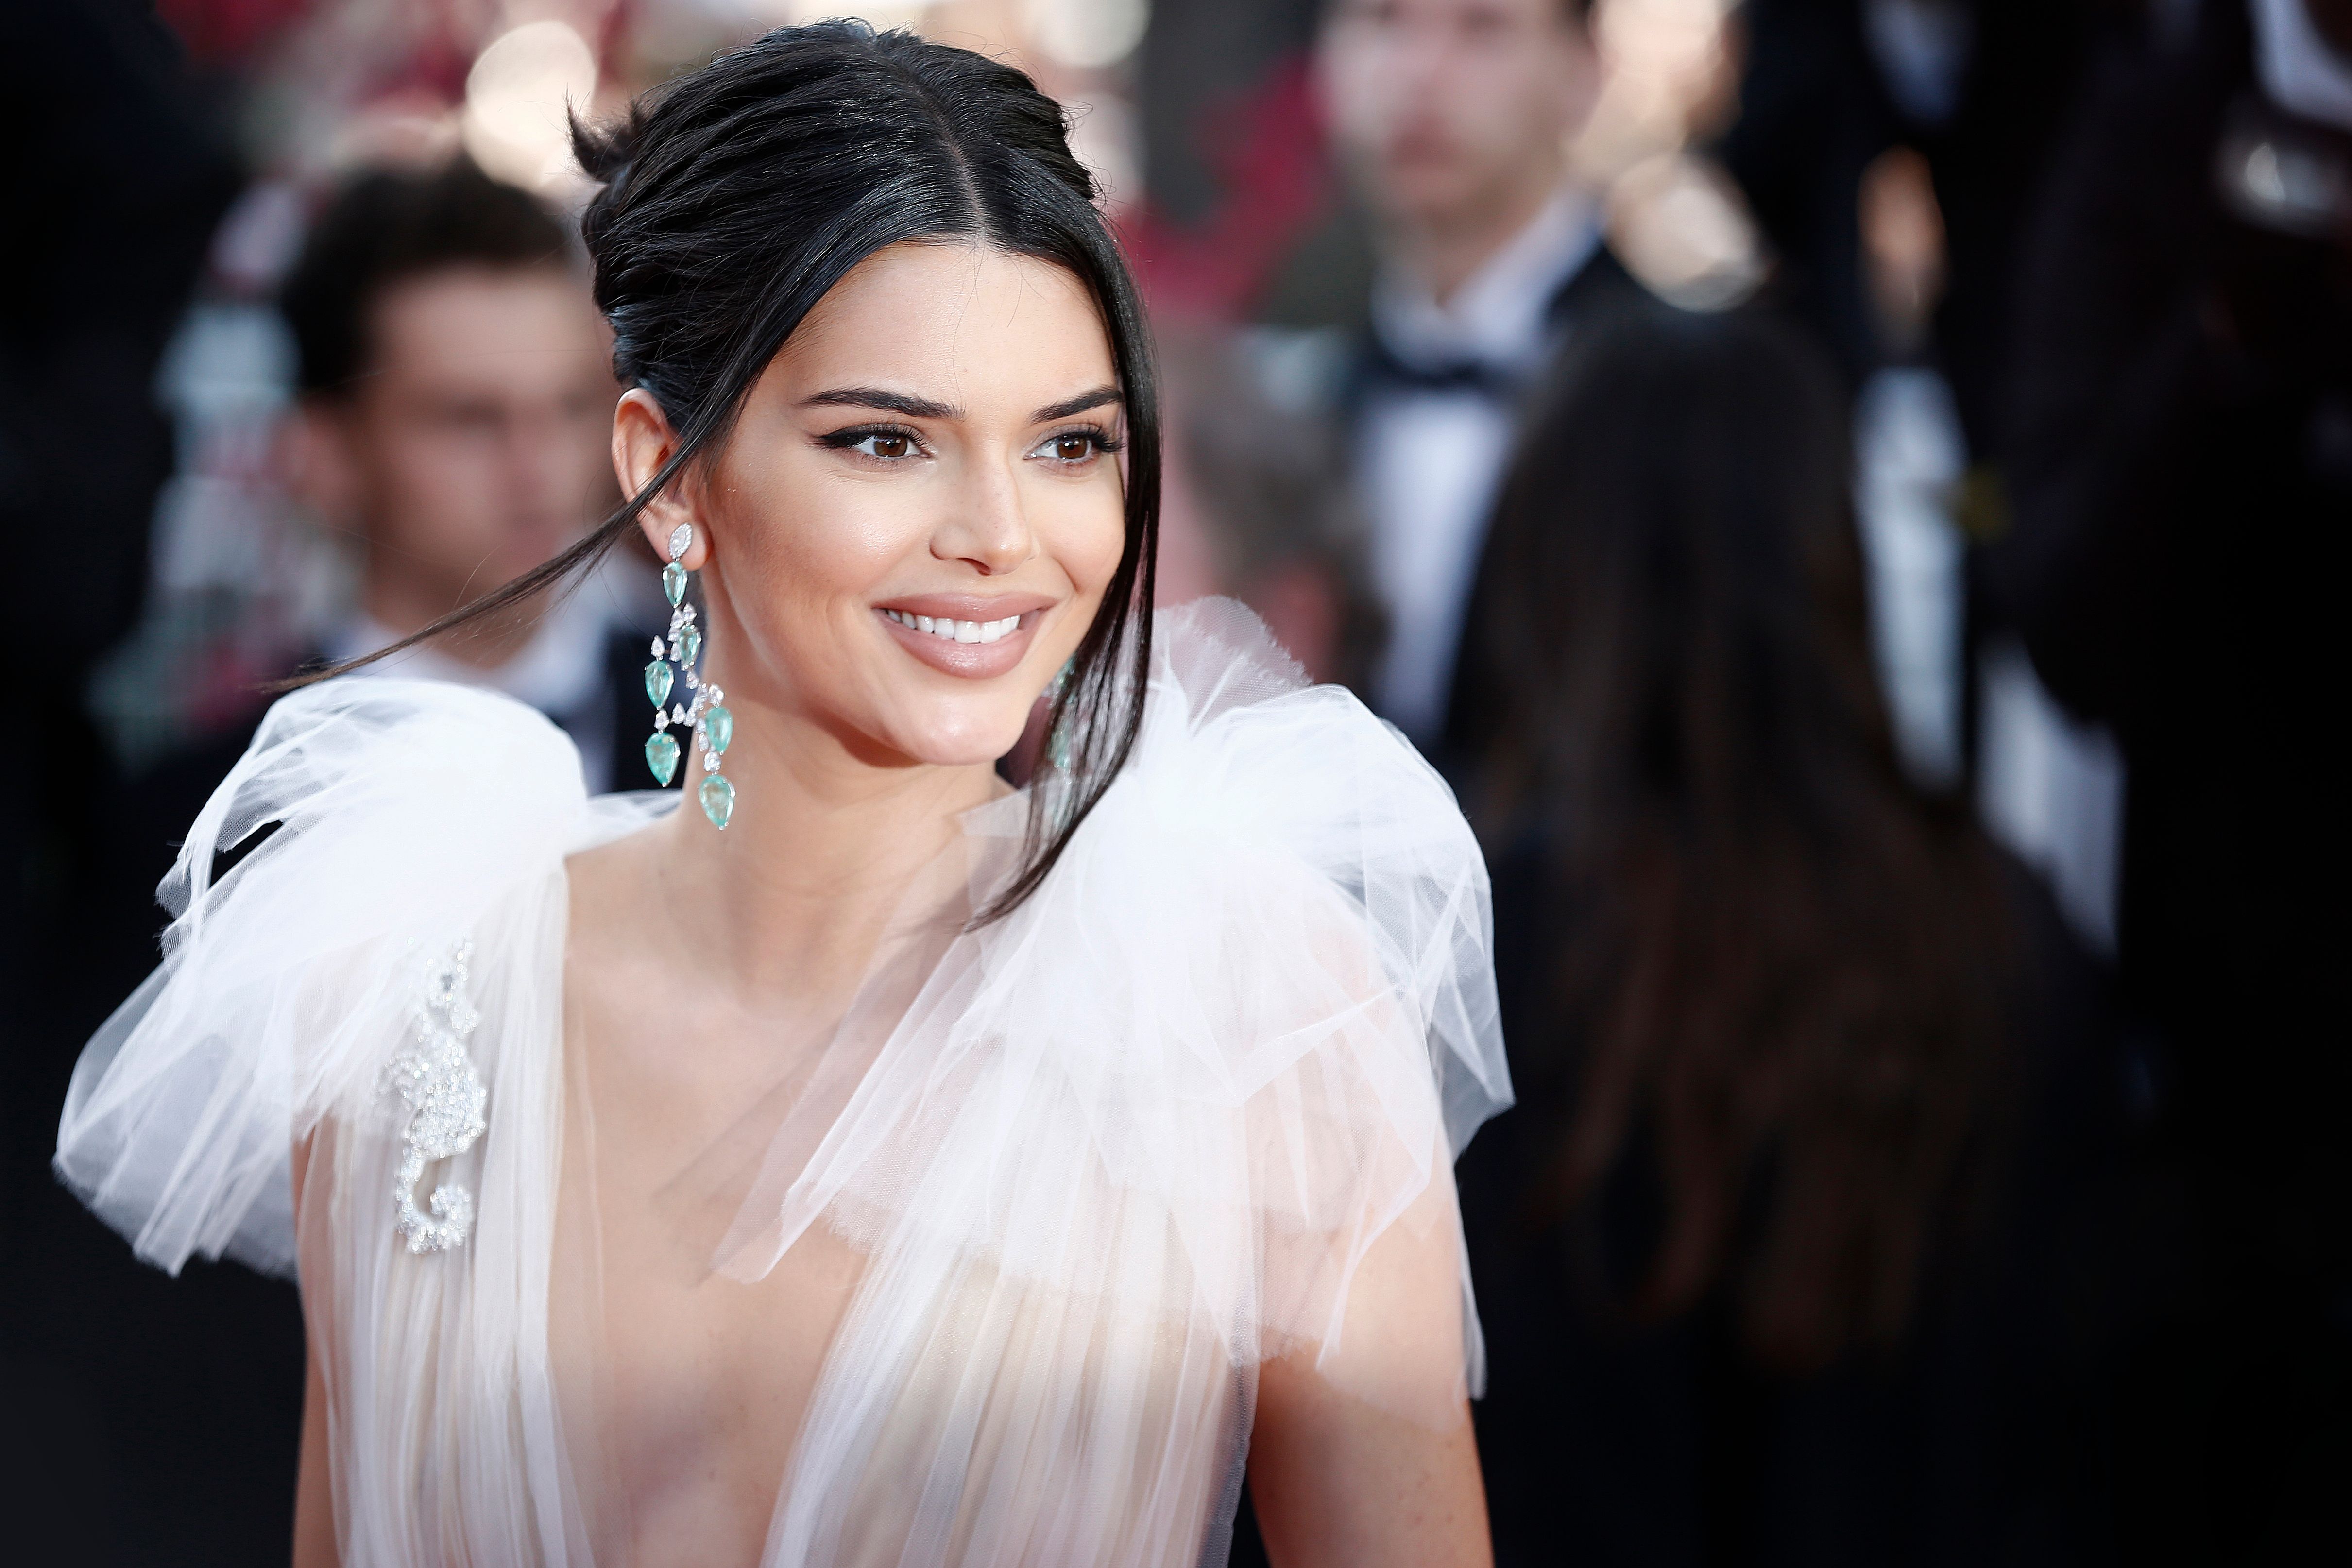 Kendall Jenner wears plunging white tulle dress at an event.